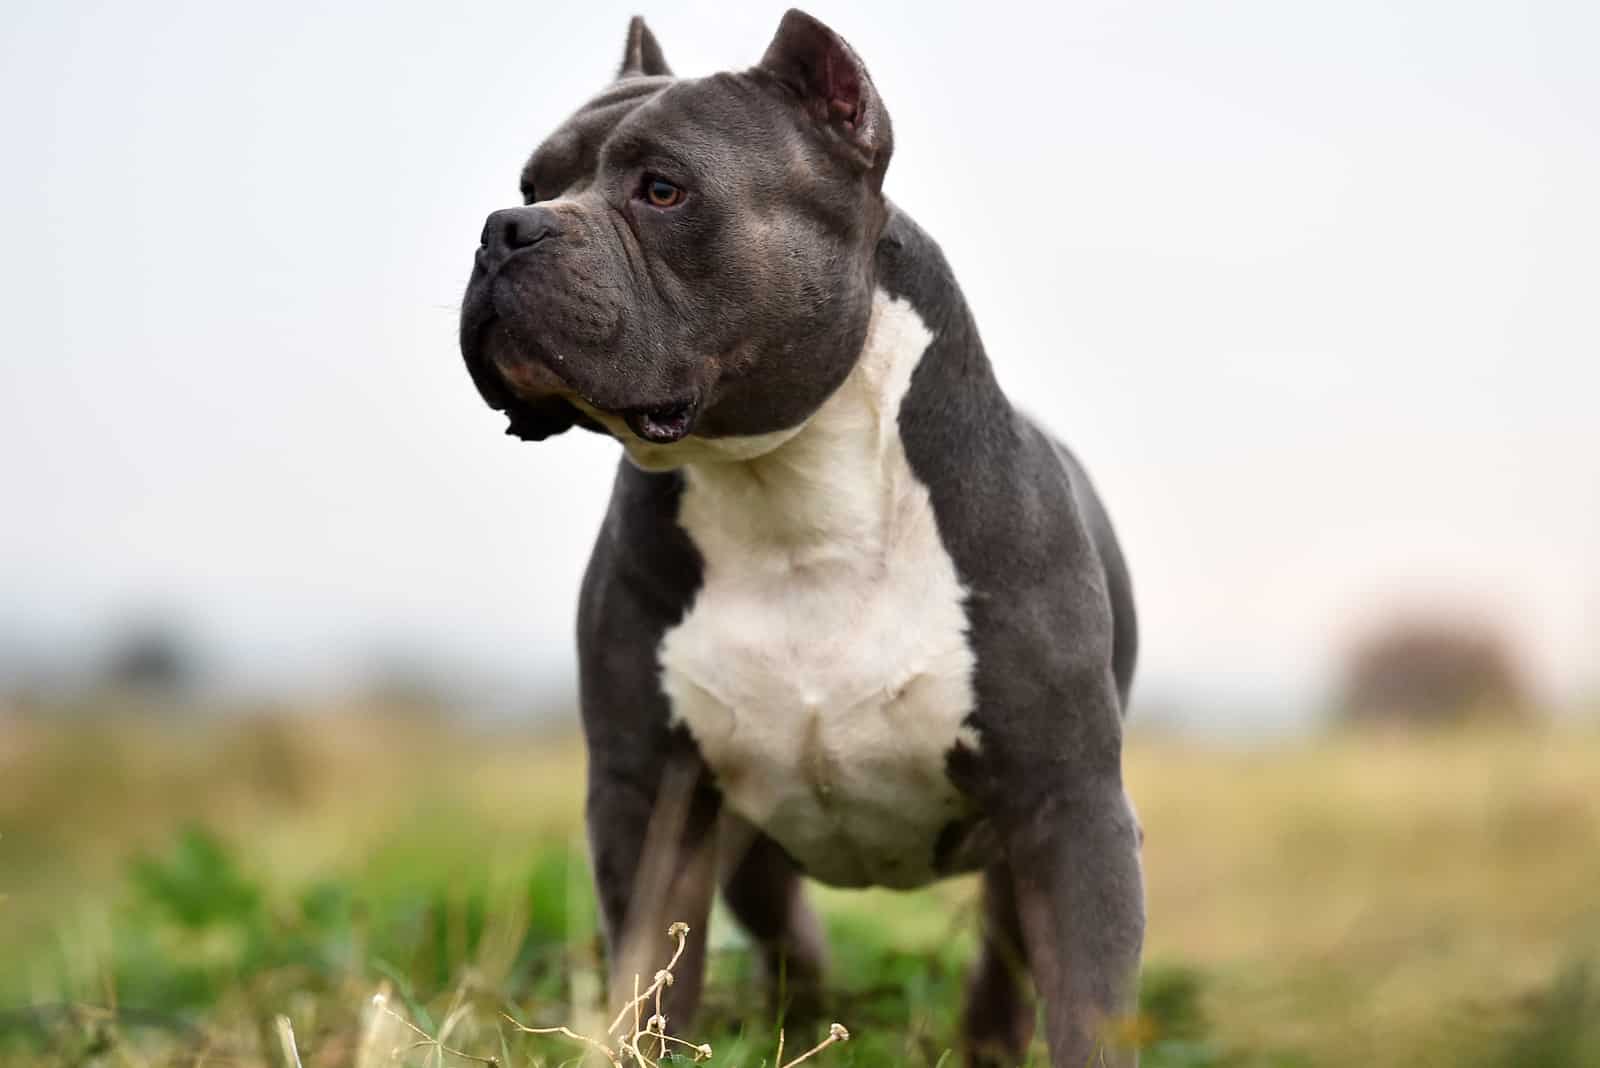 The American Bully stands in the grass and looks around